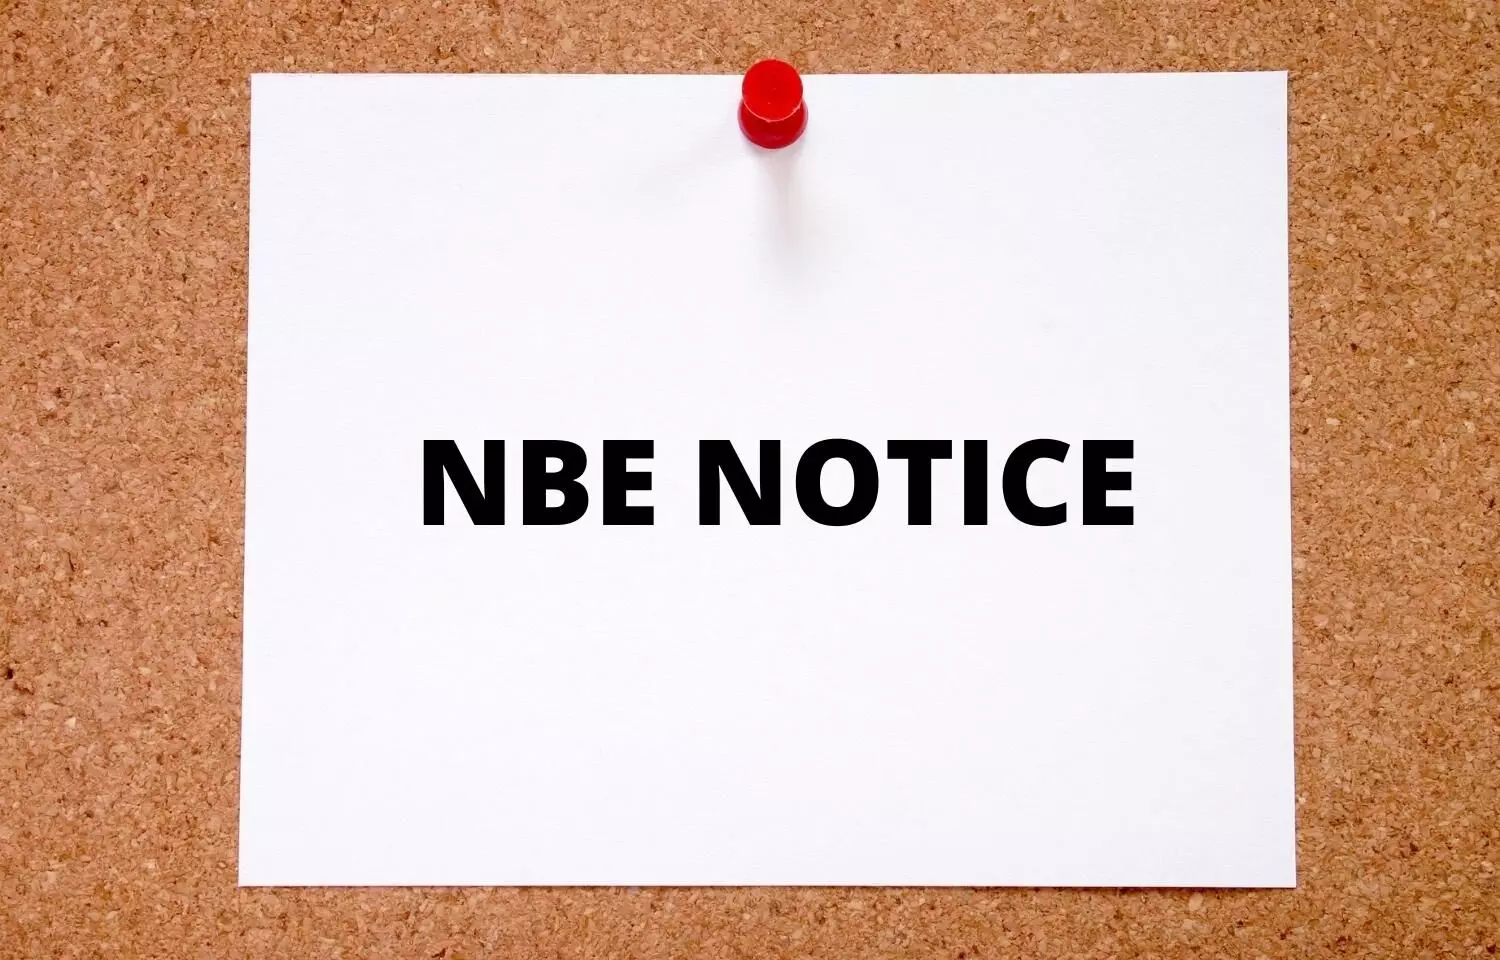 Pay Annual DNB Course Fee Directly To NBE: Natboard Tells NEET PG candidates